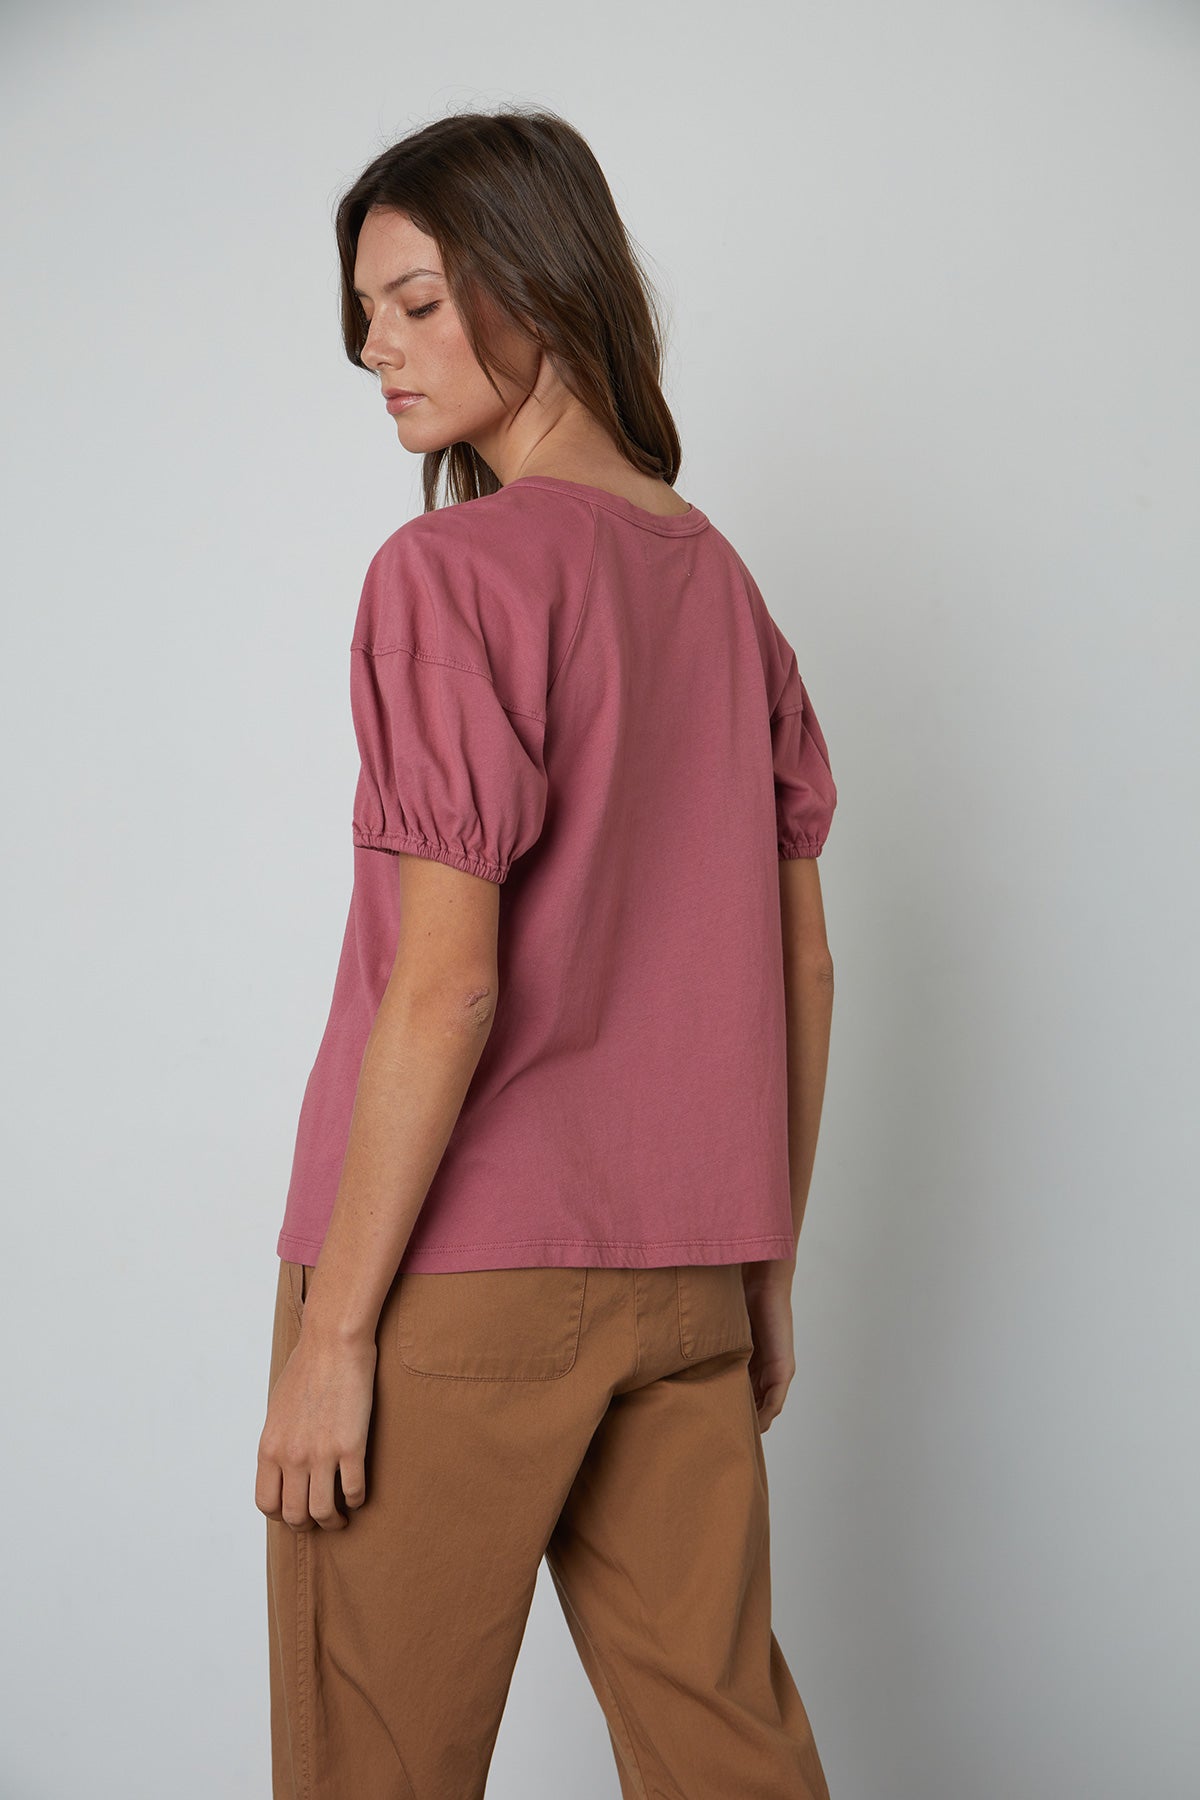 Vernice Puff Sleeve Top in Beauty with Misty pants in sepia back side view-25011938853057